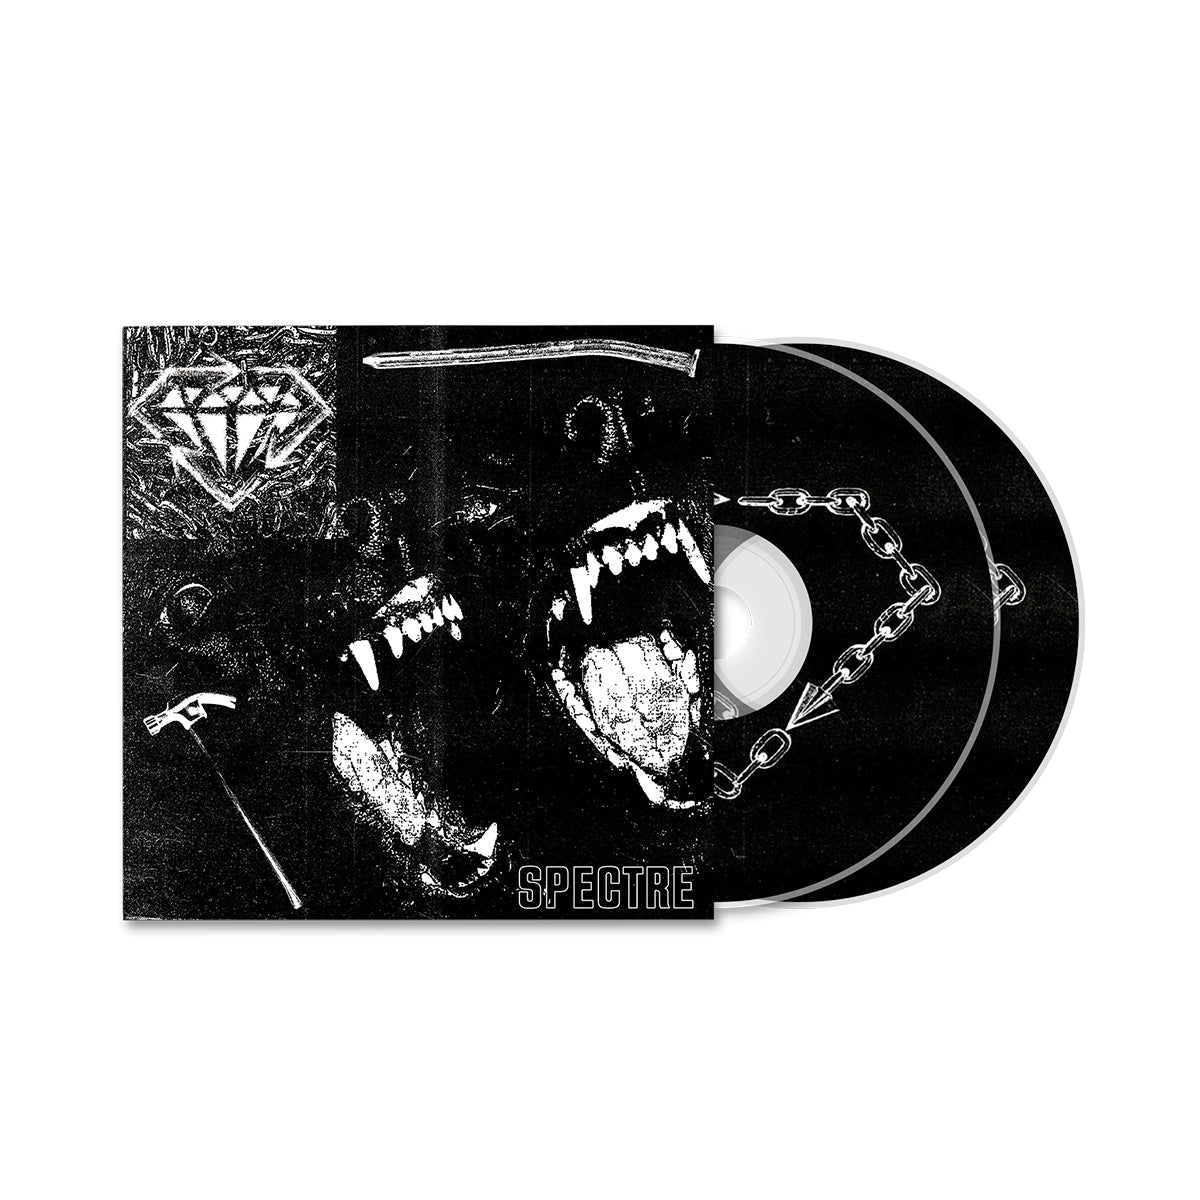 STICK TO YOUR GUNS "Spectre - Deluxe" 2xCD